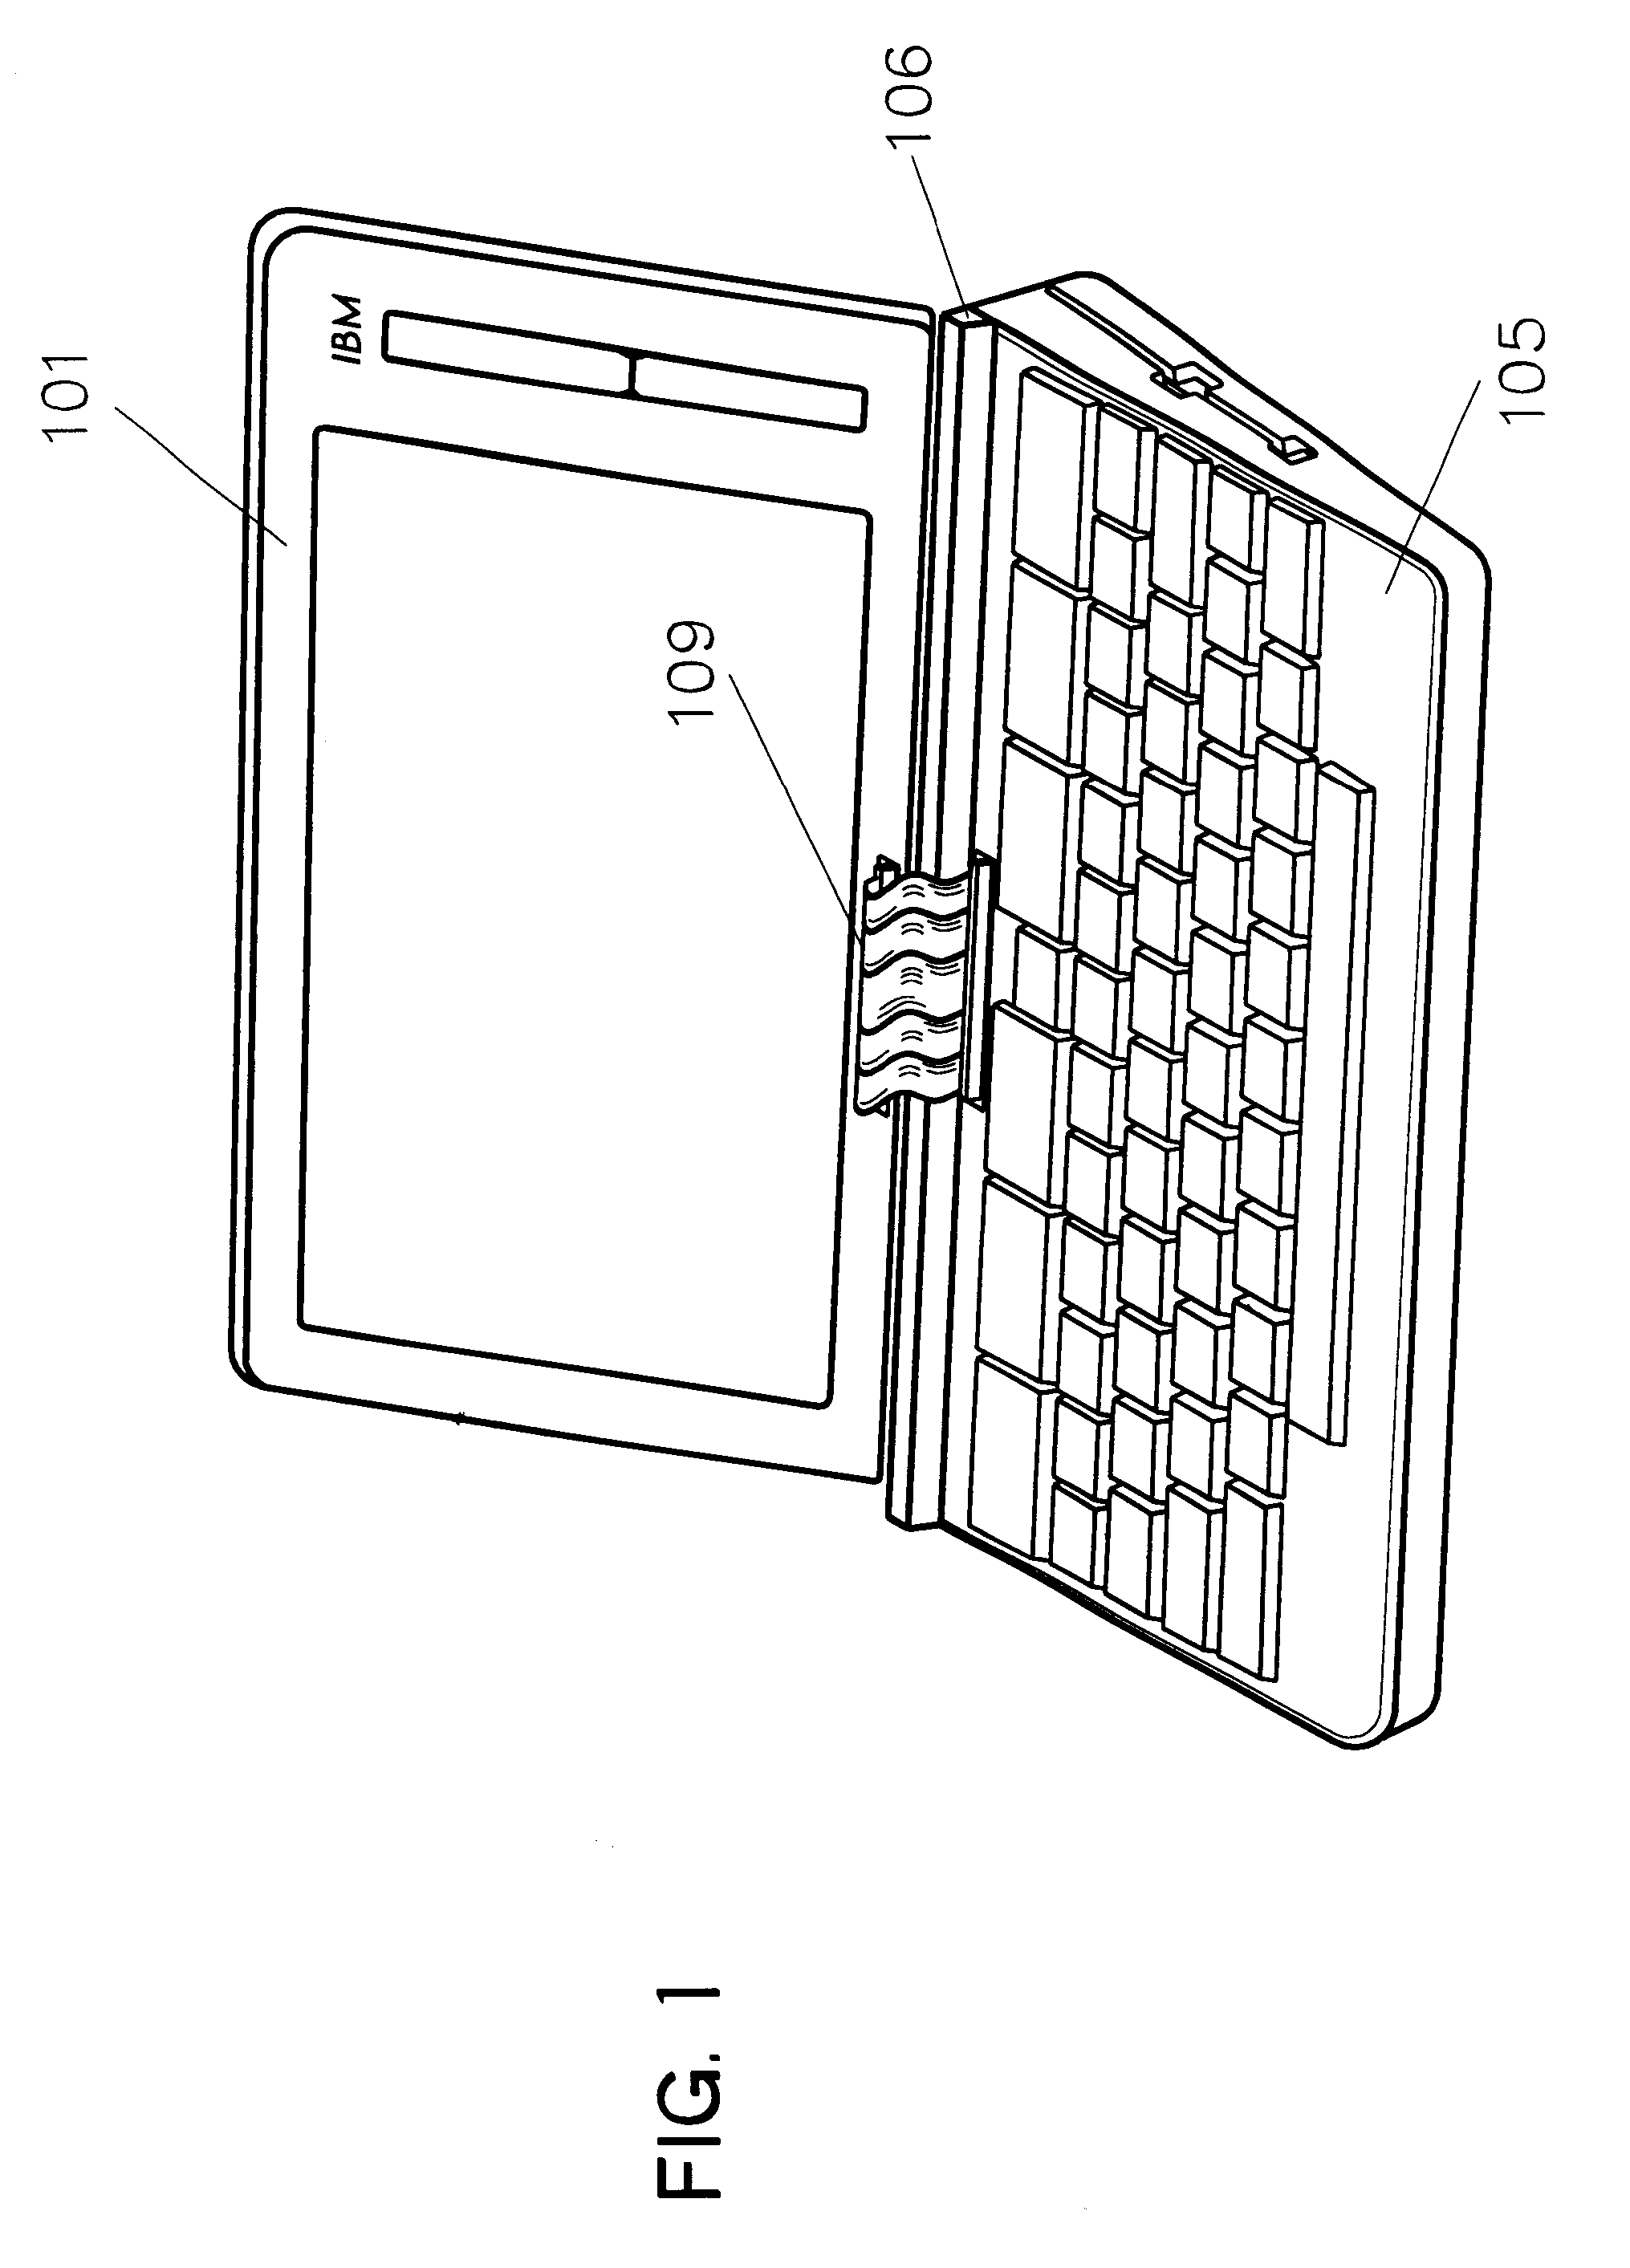 Pivotally extensible display device